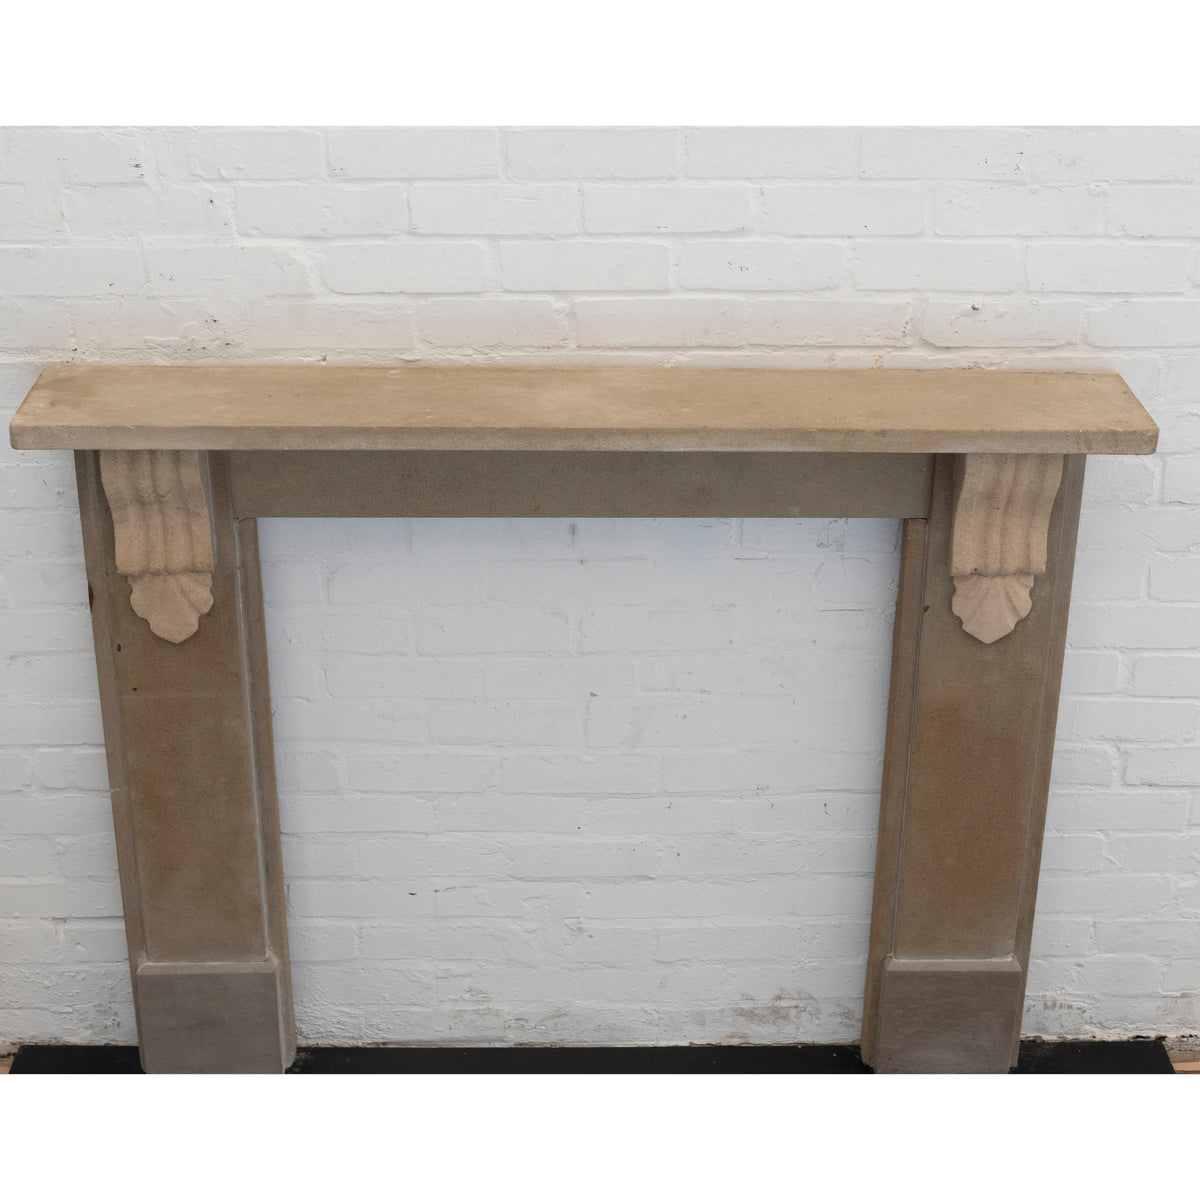 Antique Victorian Carved Stone Surround with Corbels | The Architectural Forum